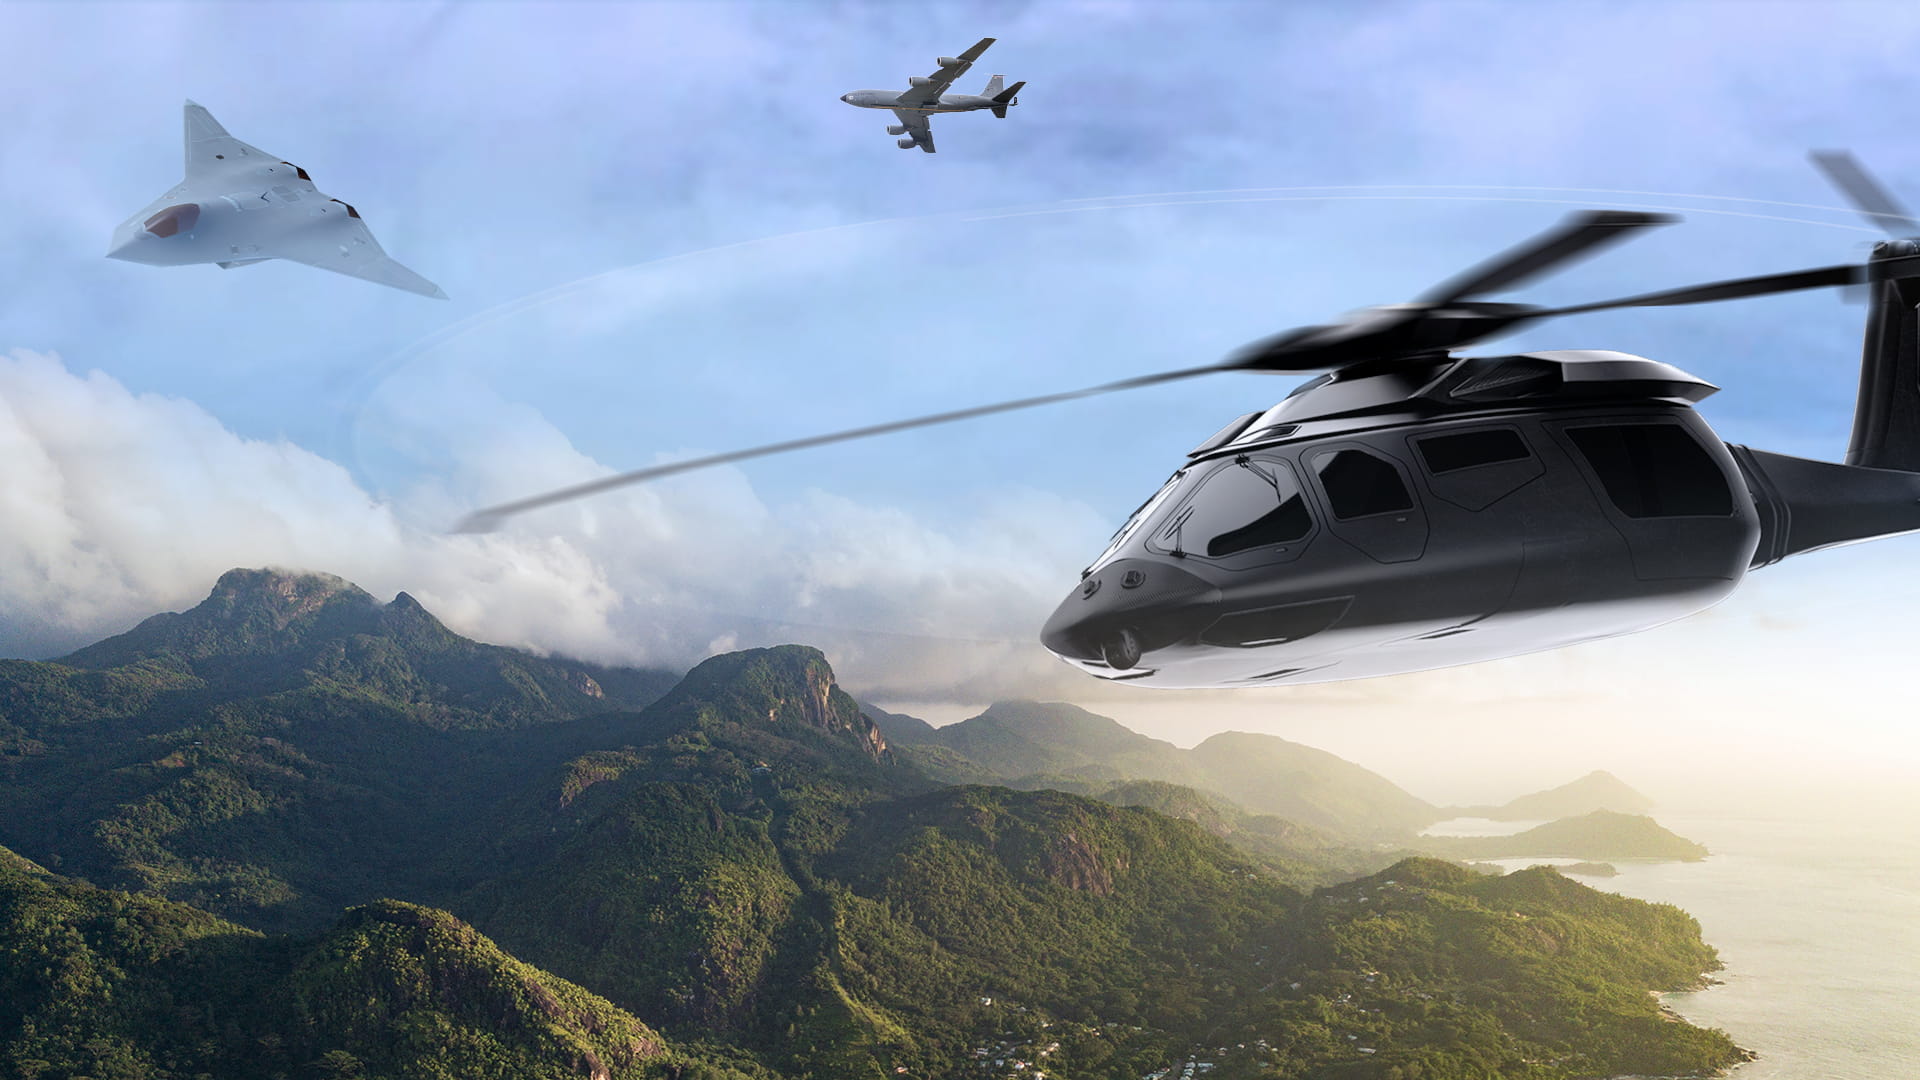 Illustration of a tanker transport, sixth gen fighter, and future vertical lift helicopter flying over mountains